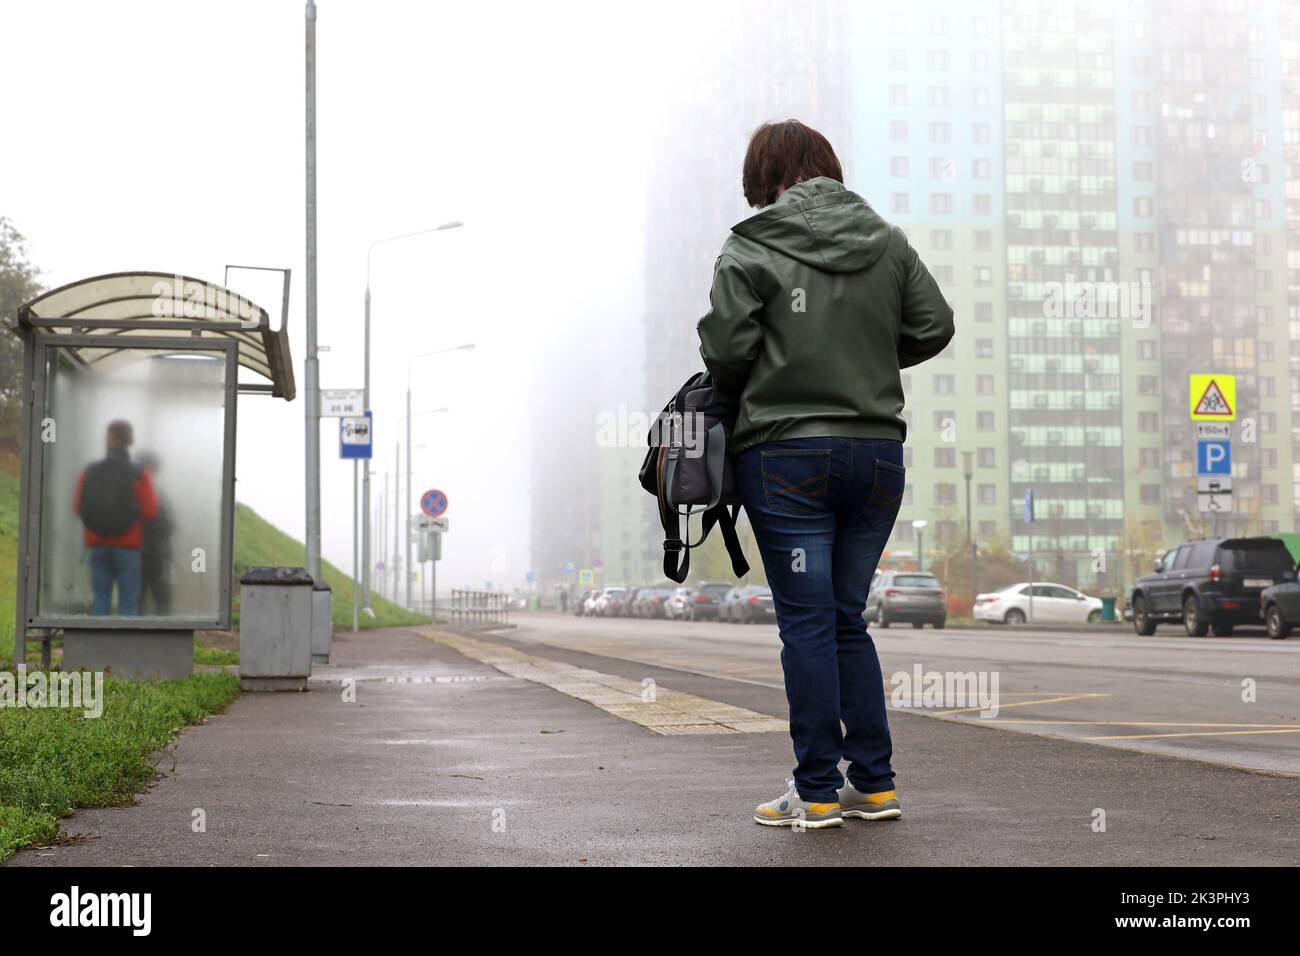 Girl standing at the bus stop on background of residential buildings in fog, public transport in autumn city Stock Photo